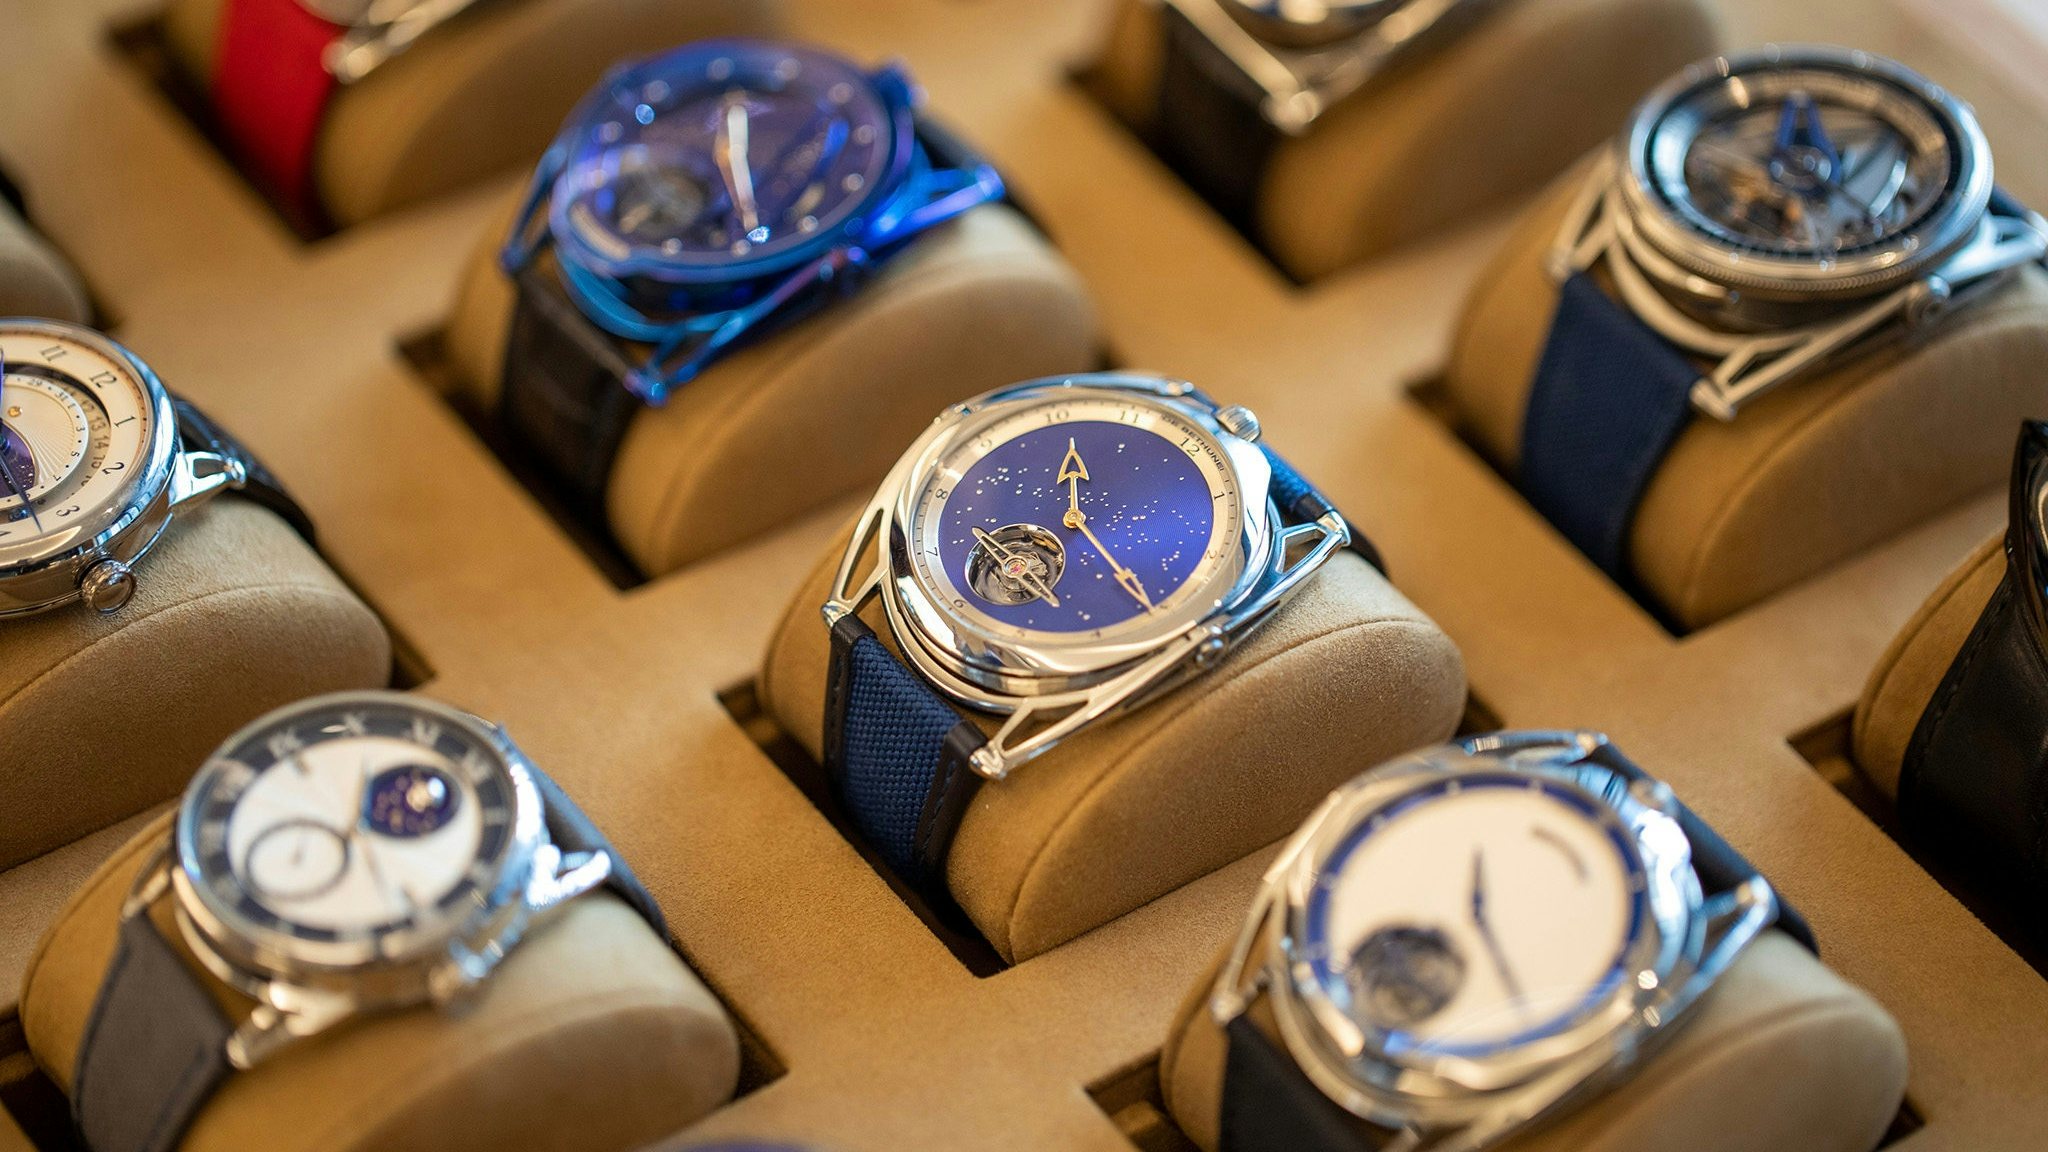 The secondary luxury watch market in China is set to grow faster than other mature markets, analysts say. Photo: WatchBox